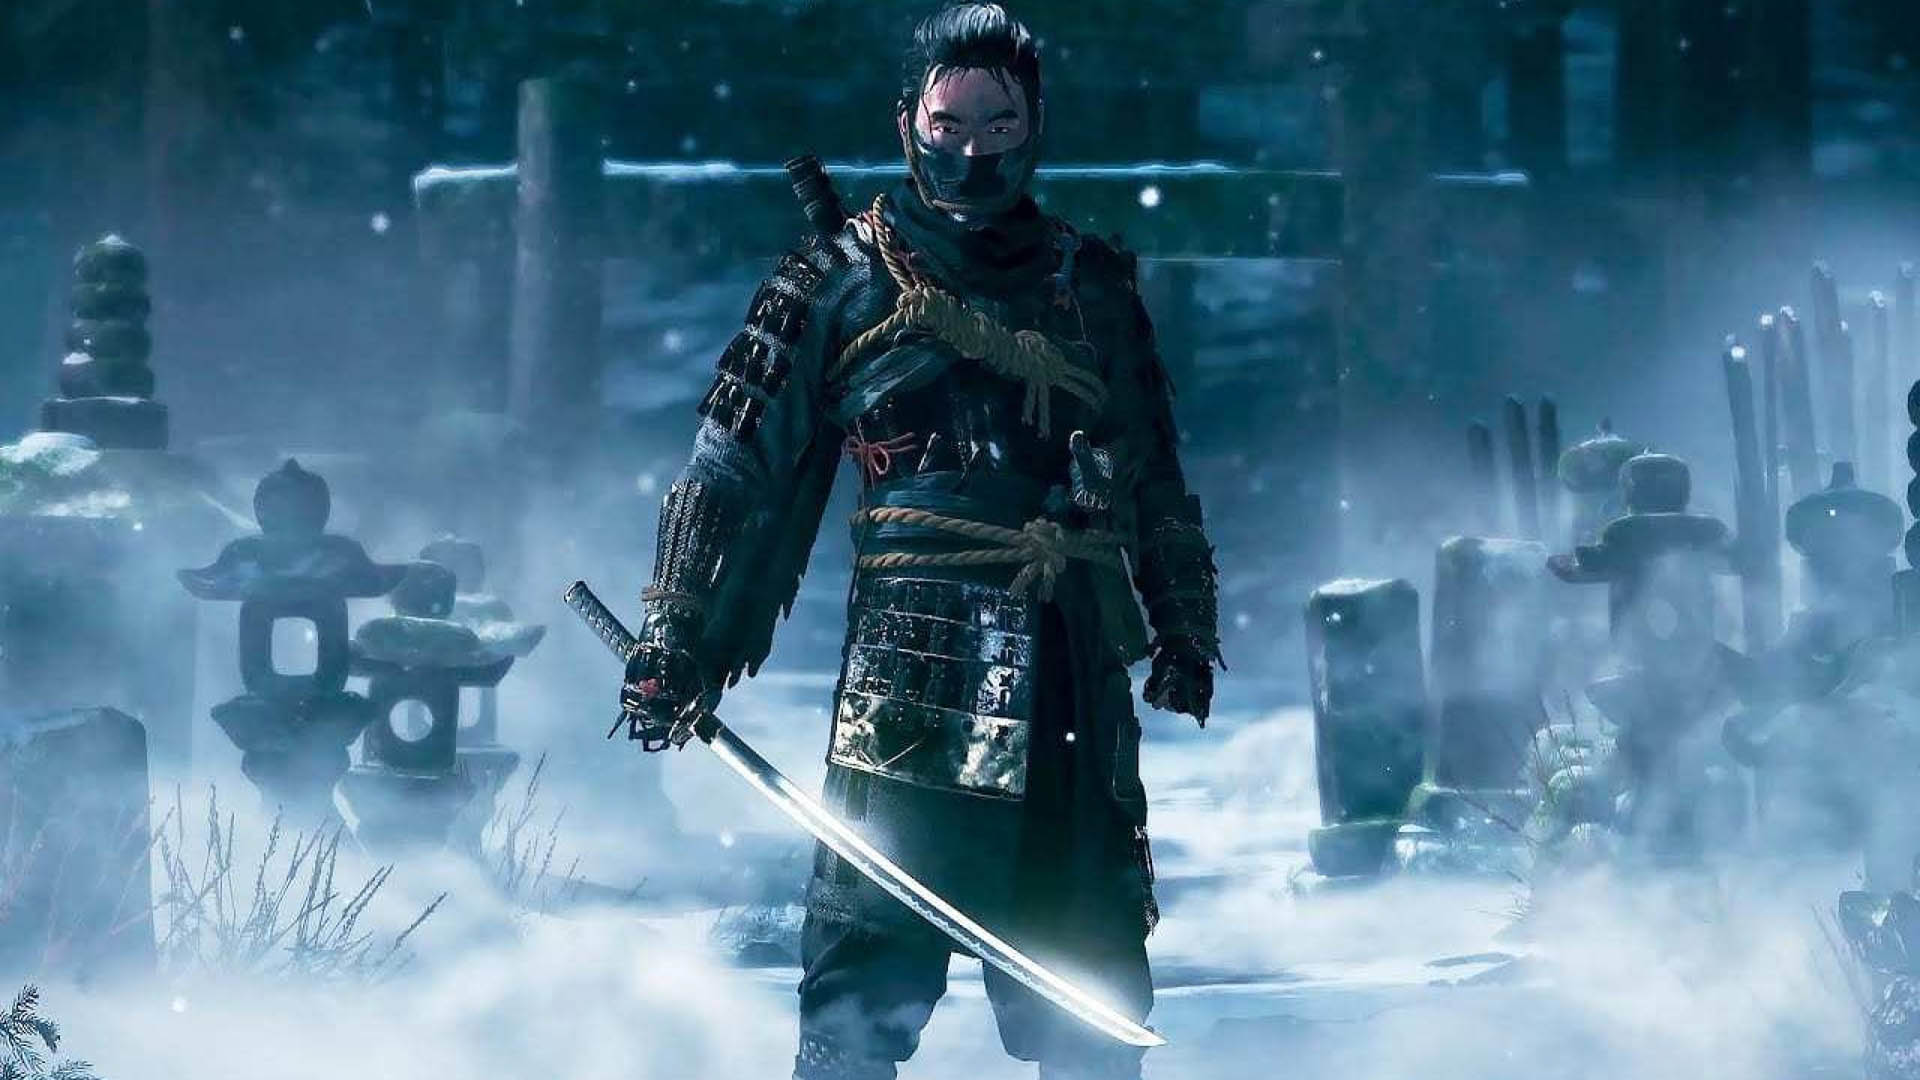 New Job Listing At Sucker Punch Productions Teases A Ghost Of Tsushima Sequel